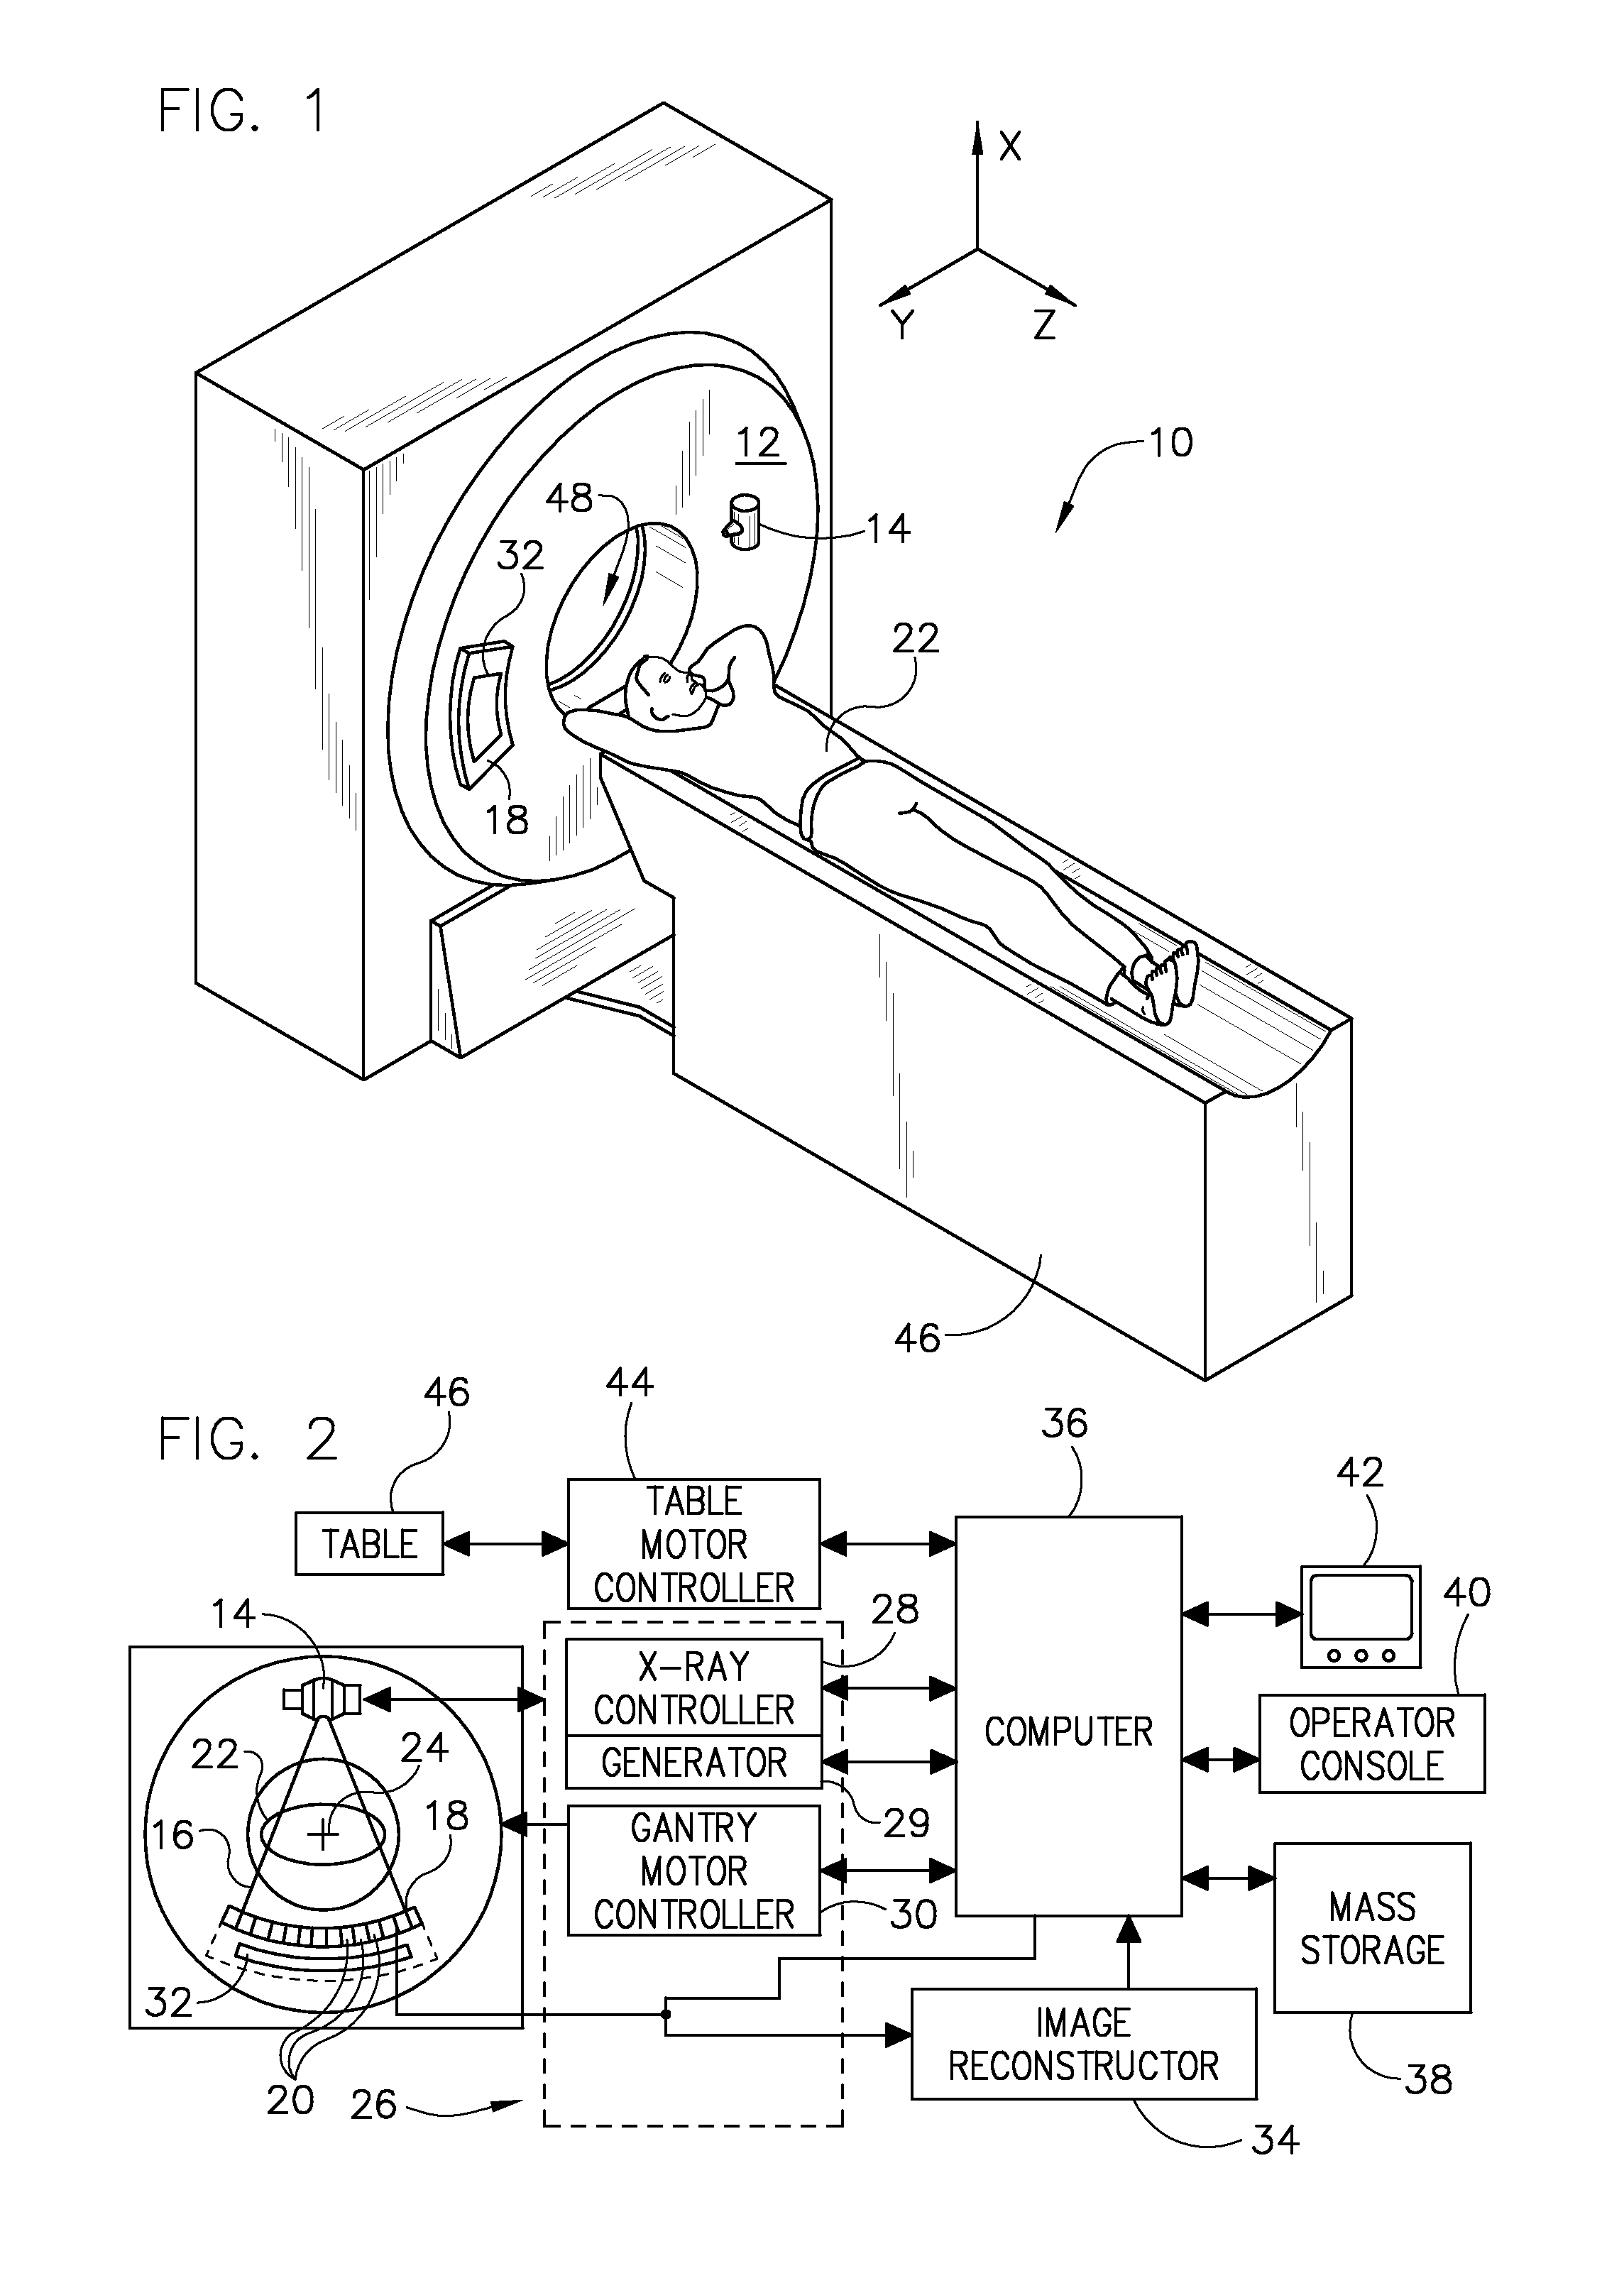 System and method of fast kVp switching for dual energy CT